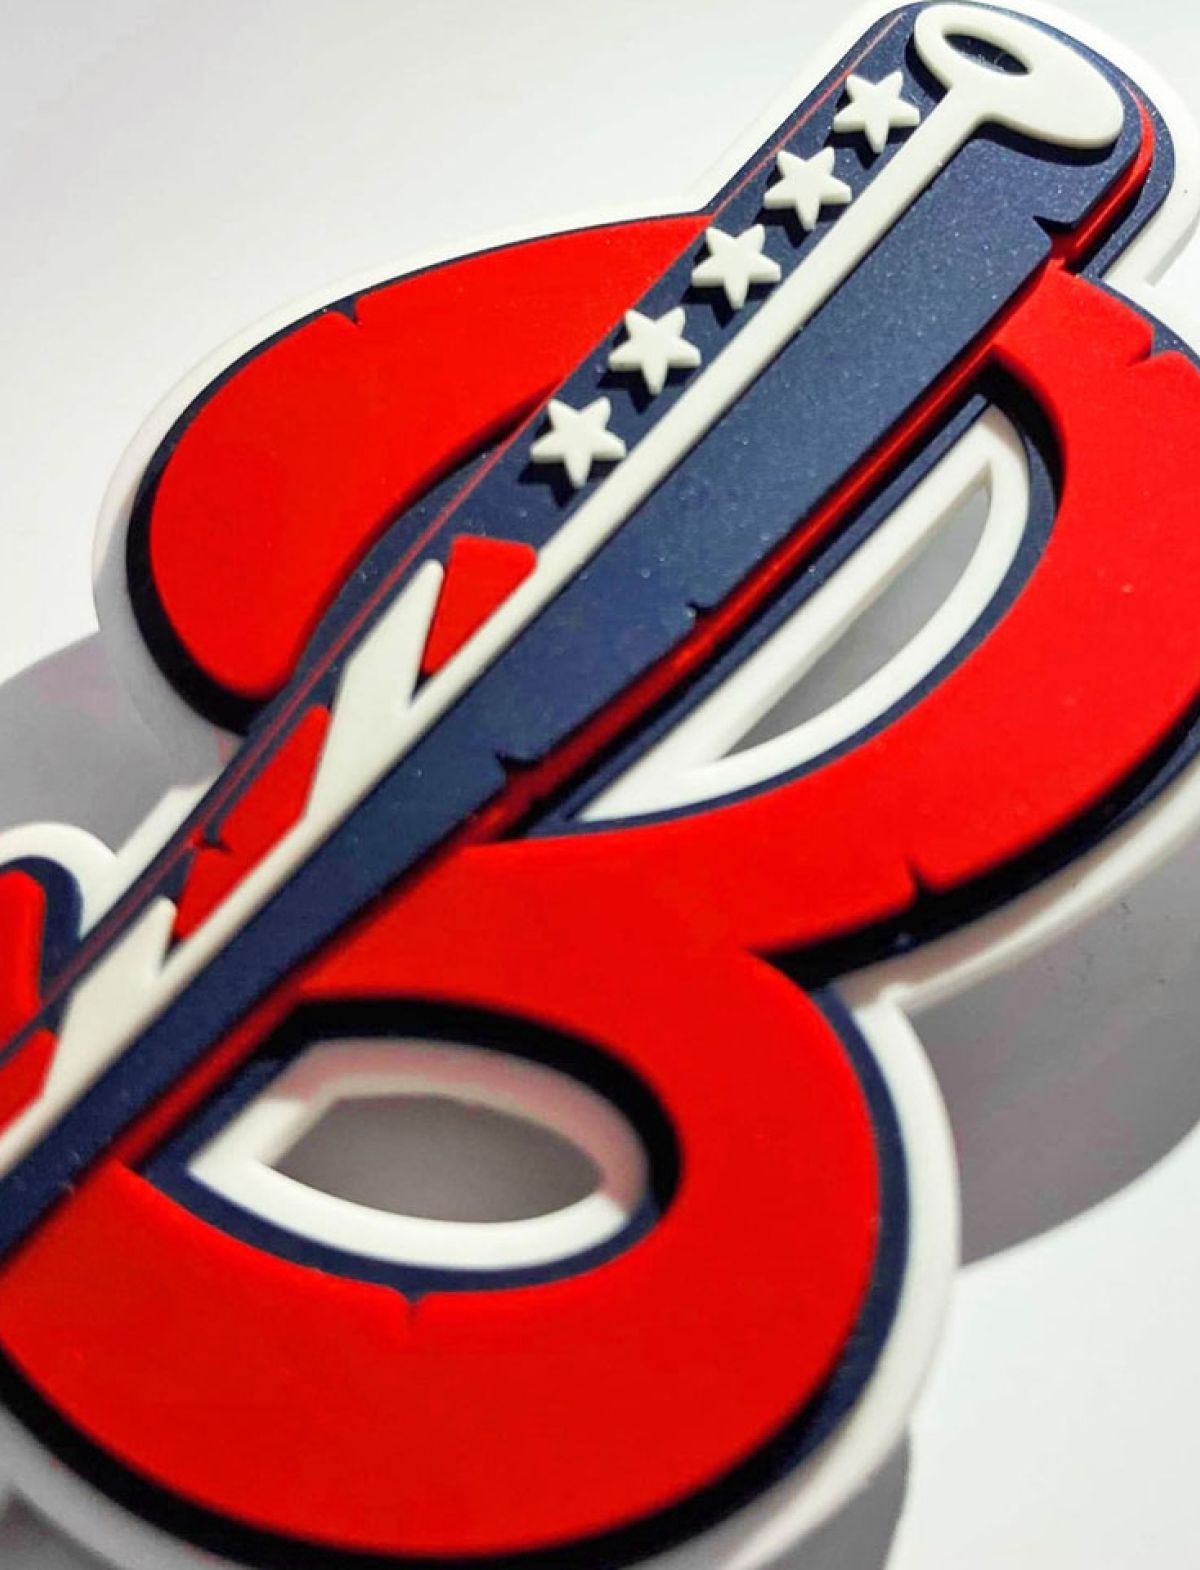 3d batting helmet decal red b with blue bat and stars